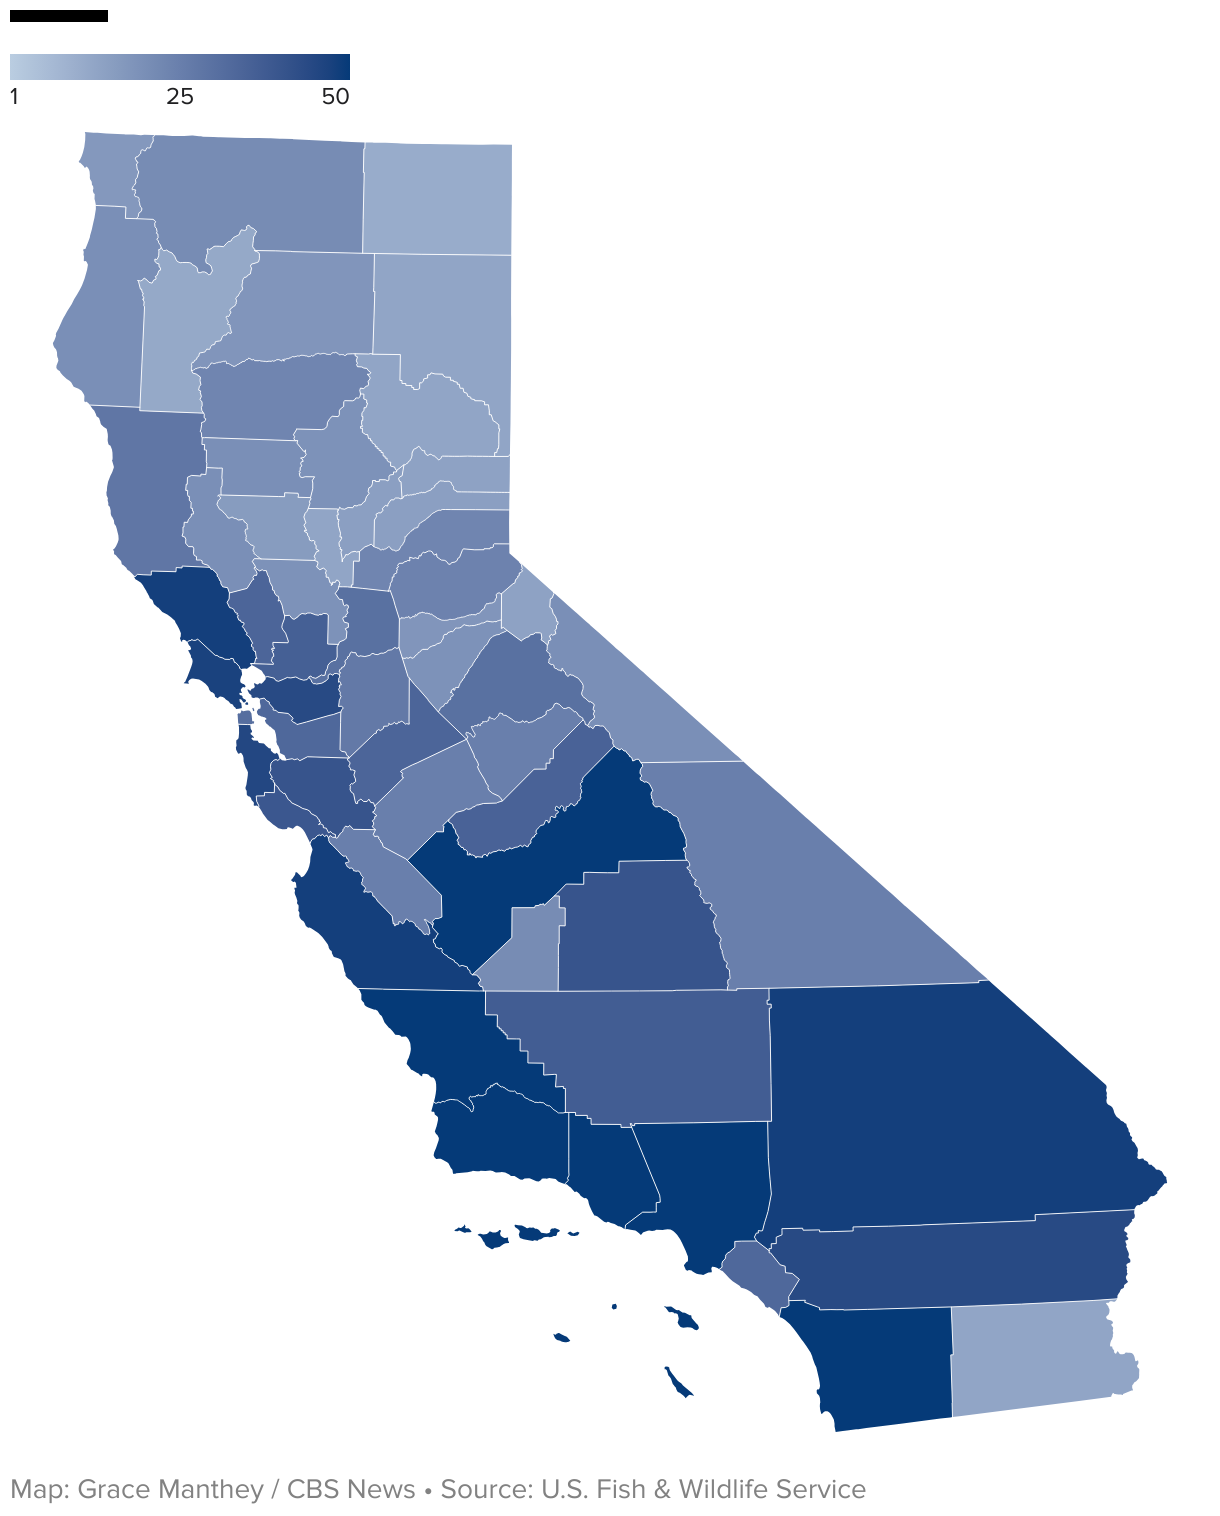 A map showing the number of endangered species by county in California, colored in shades of blue.  Coastal, Central and Southern California have the highest rates.